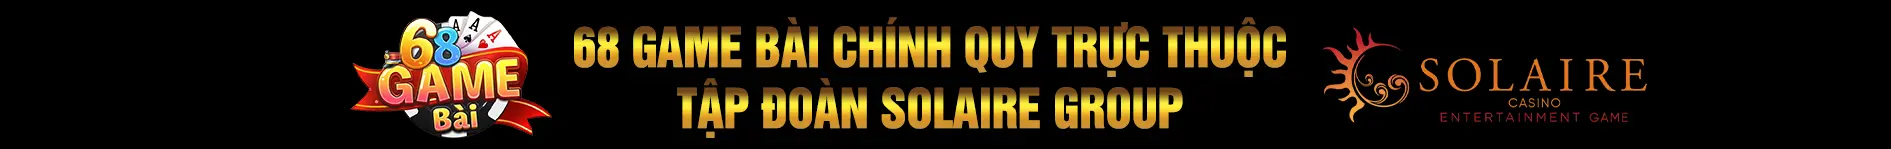 68 game bài Solaire Group